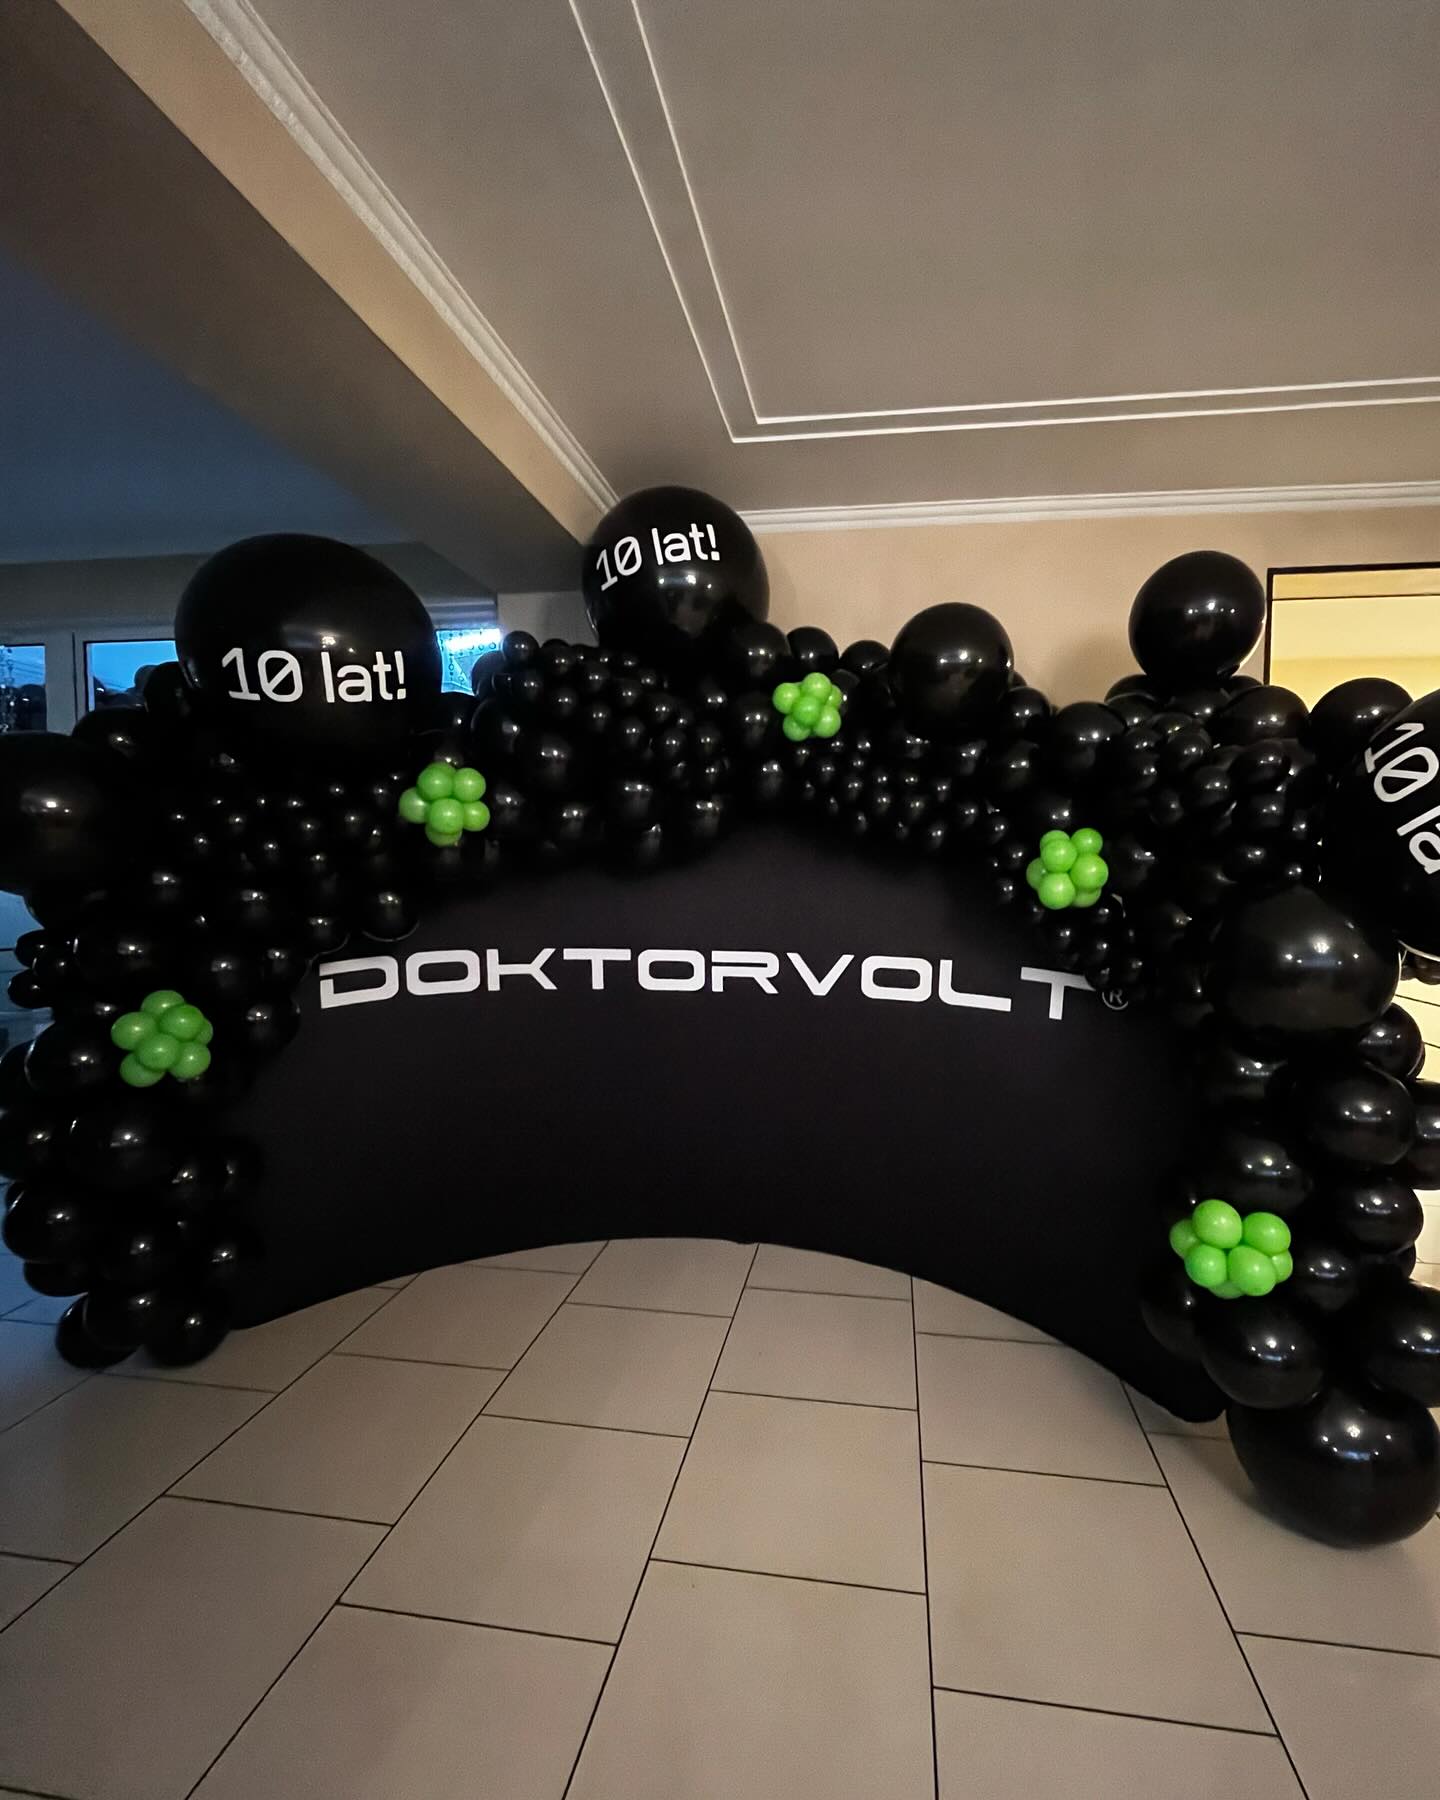 10 Years of Innovation: Doktorvolt Continues Its Evolution in the World of Electrical Engineering